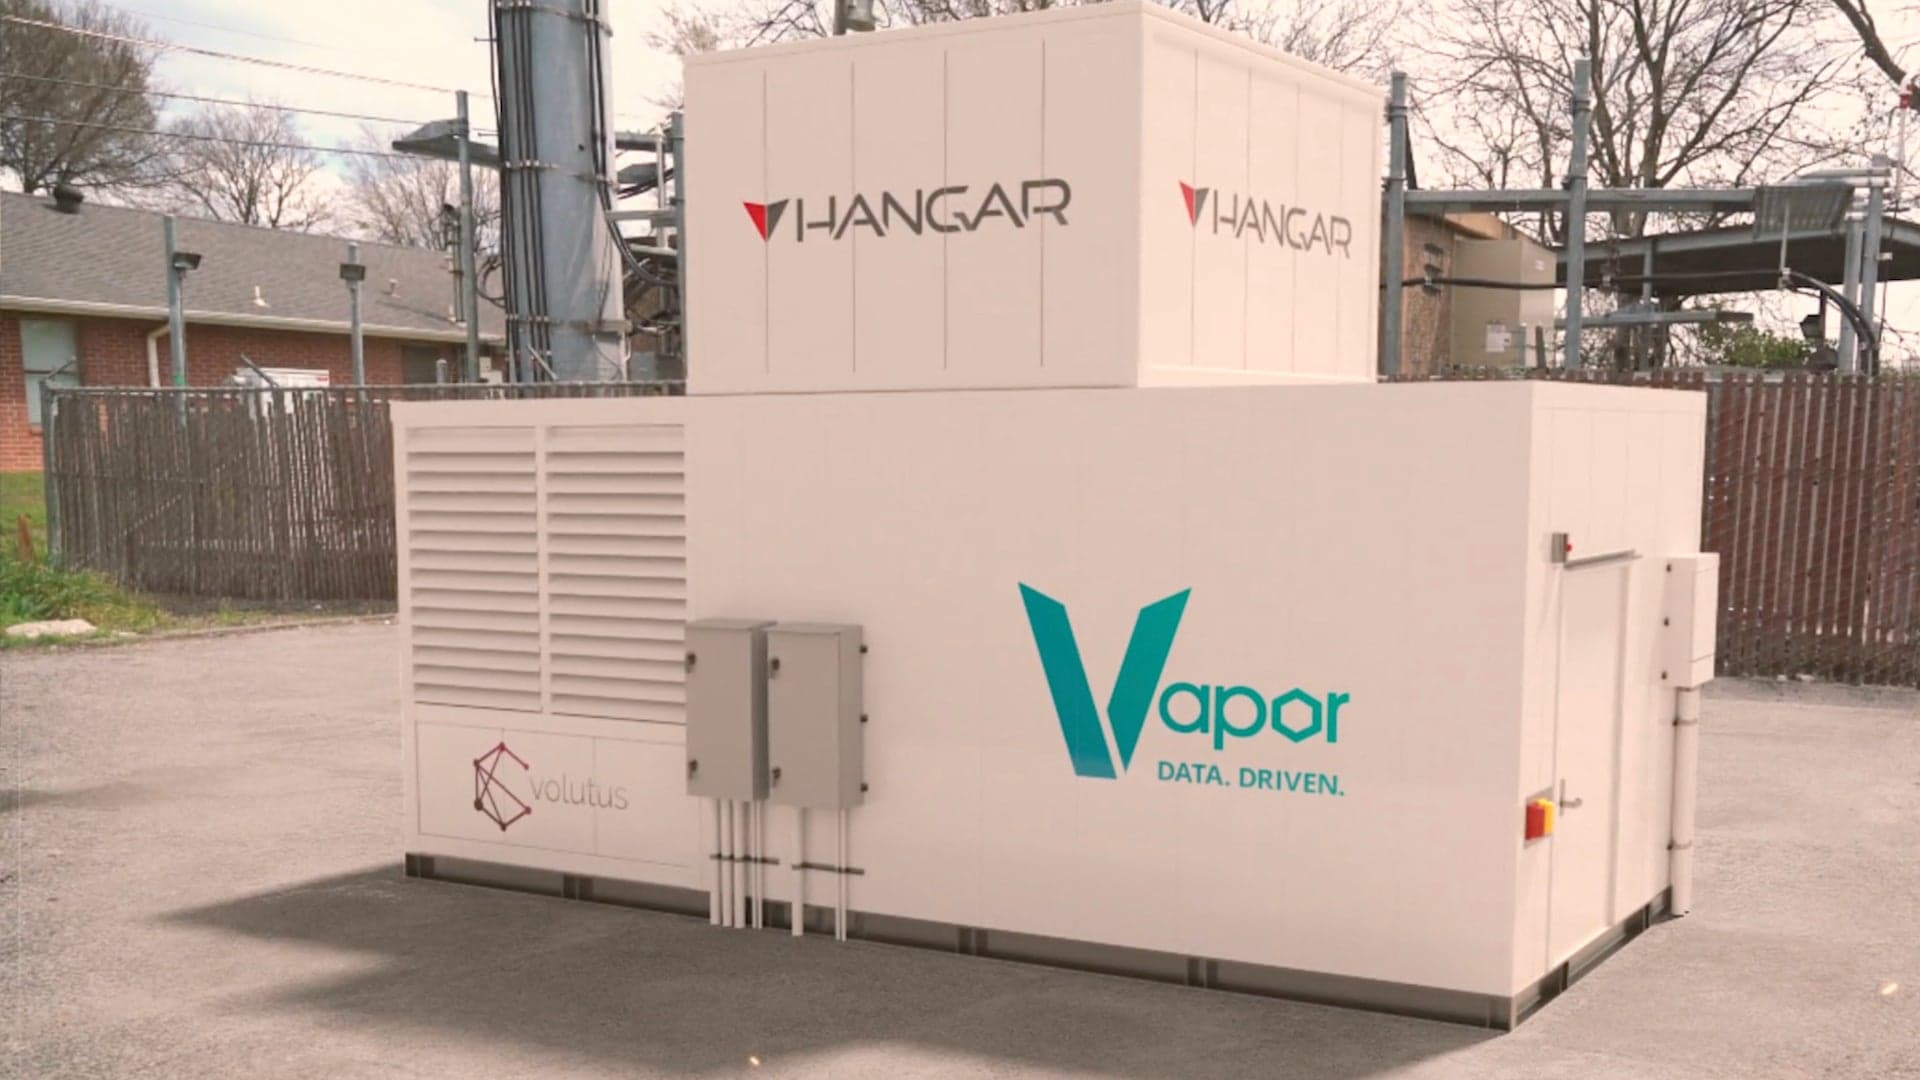 Hangar Technology Will Use Vapor IO’s Data Centers to Automate Drones in Kinetic Edge Cities